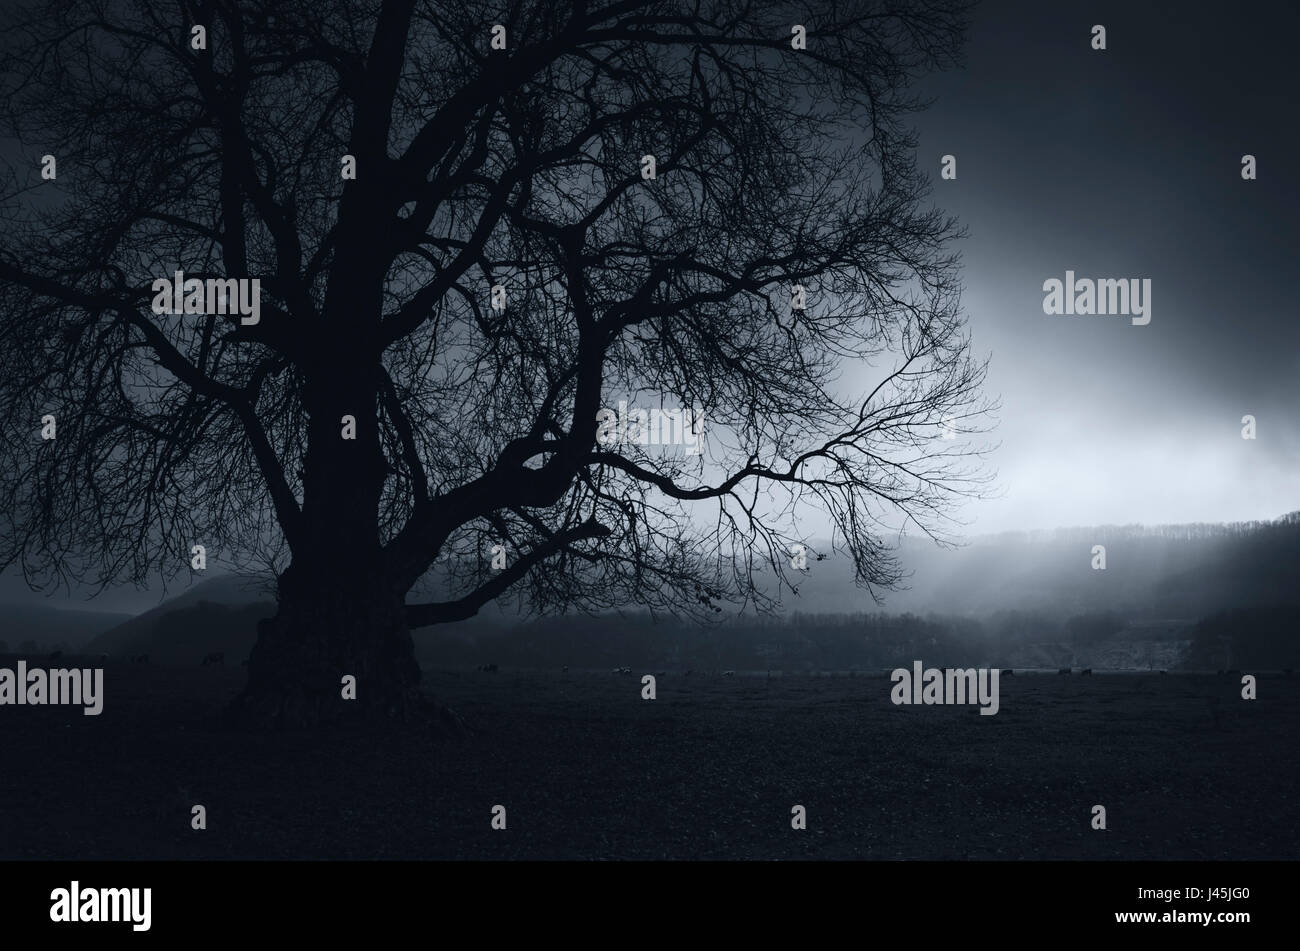 Dark landscape with old tree silhouette Stock Photo